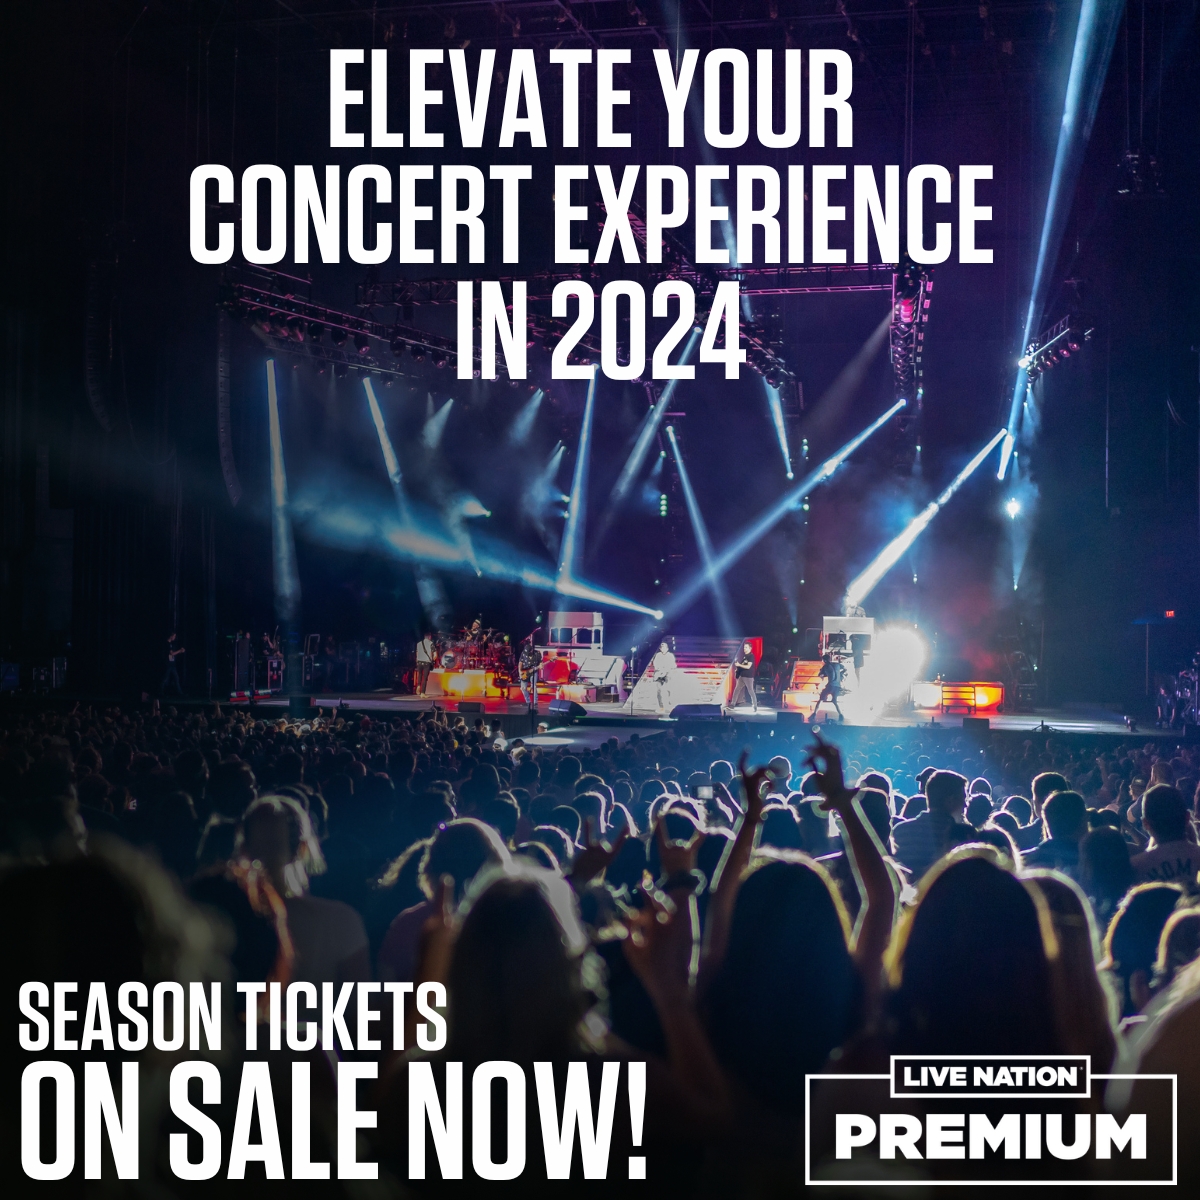 Elevate your concert experience with 2024 Premium Season Tickets! 🎟️ Enjoy Premium Seats, VIP Club Access, In-Seat Wait Service and more as a Season Ticket Holder! 🤘 Contact your local Premium Experiences Expert at livenationpremium.com to snag yours today!